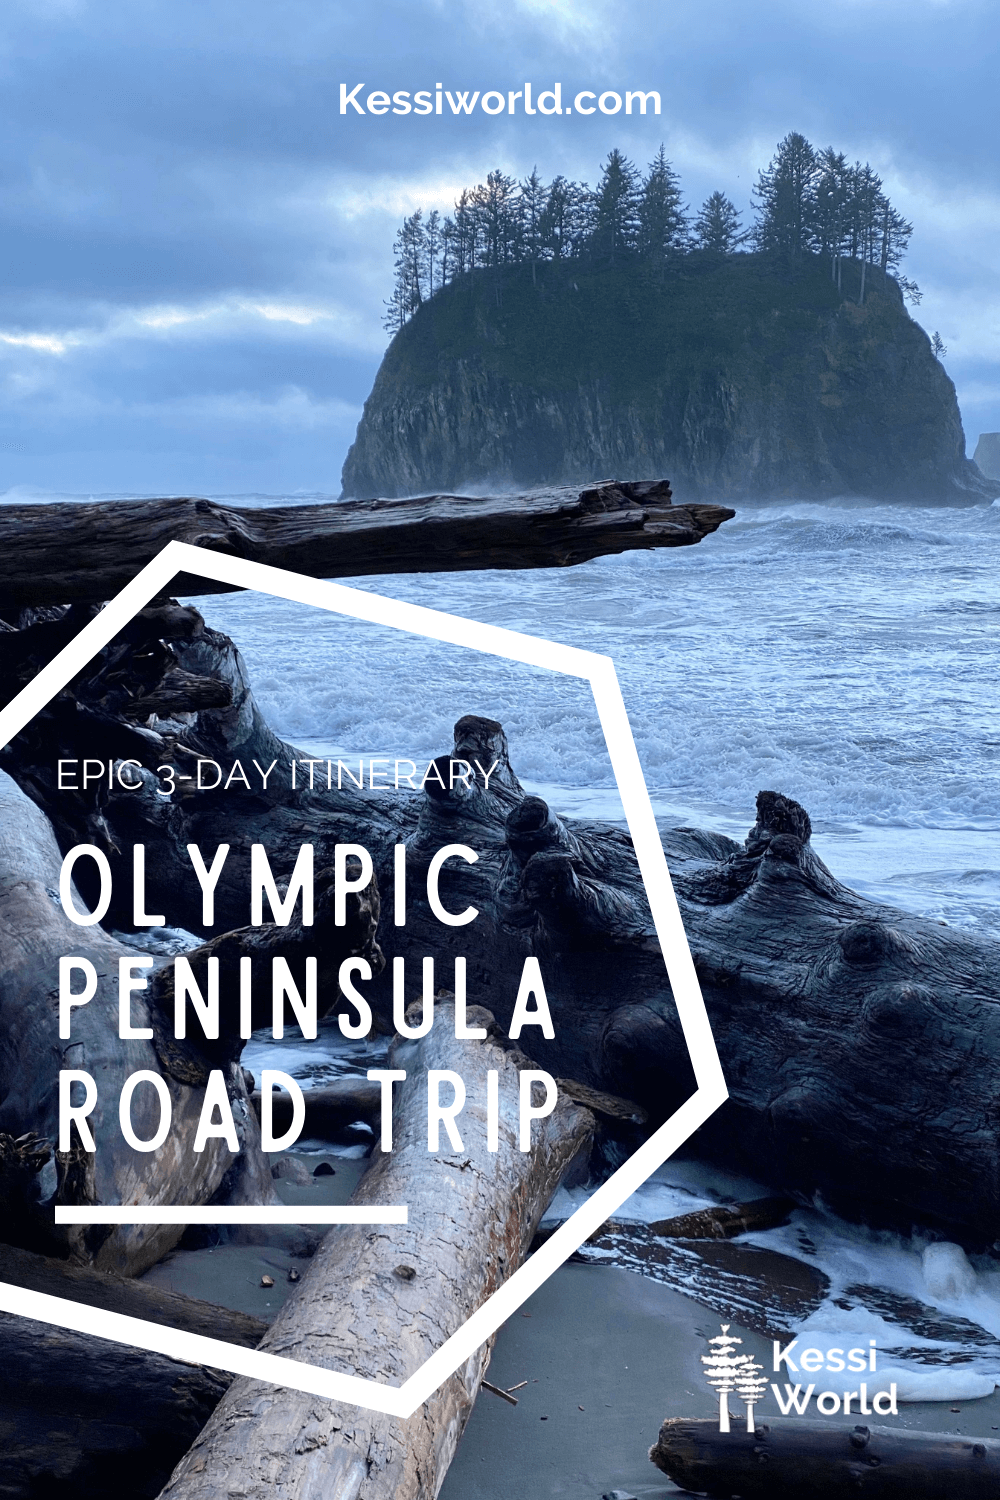 This Pinterest pin shows a stormy Olympic Peninsula beach scene with foamy waves pounding onto a beach with lots of driftwood.